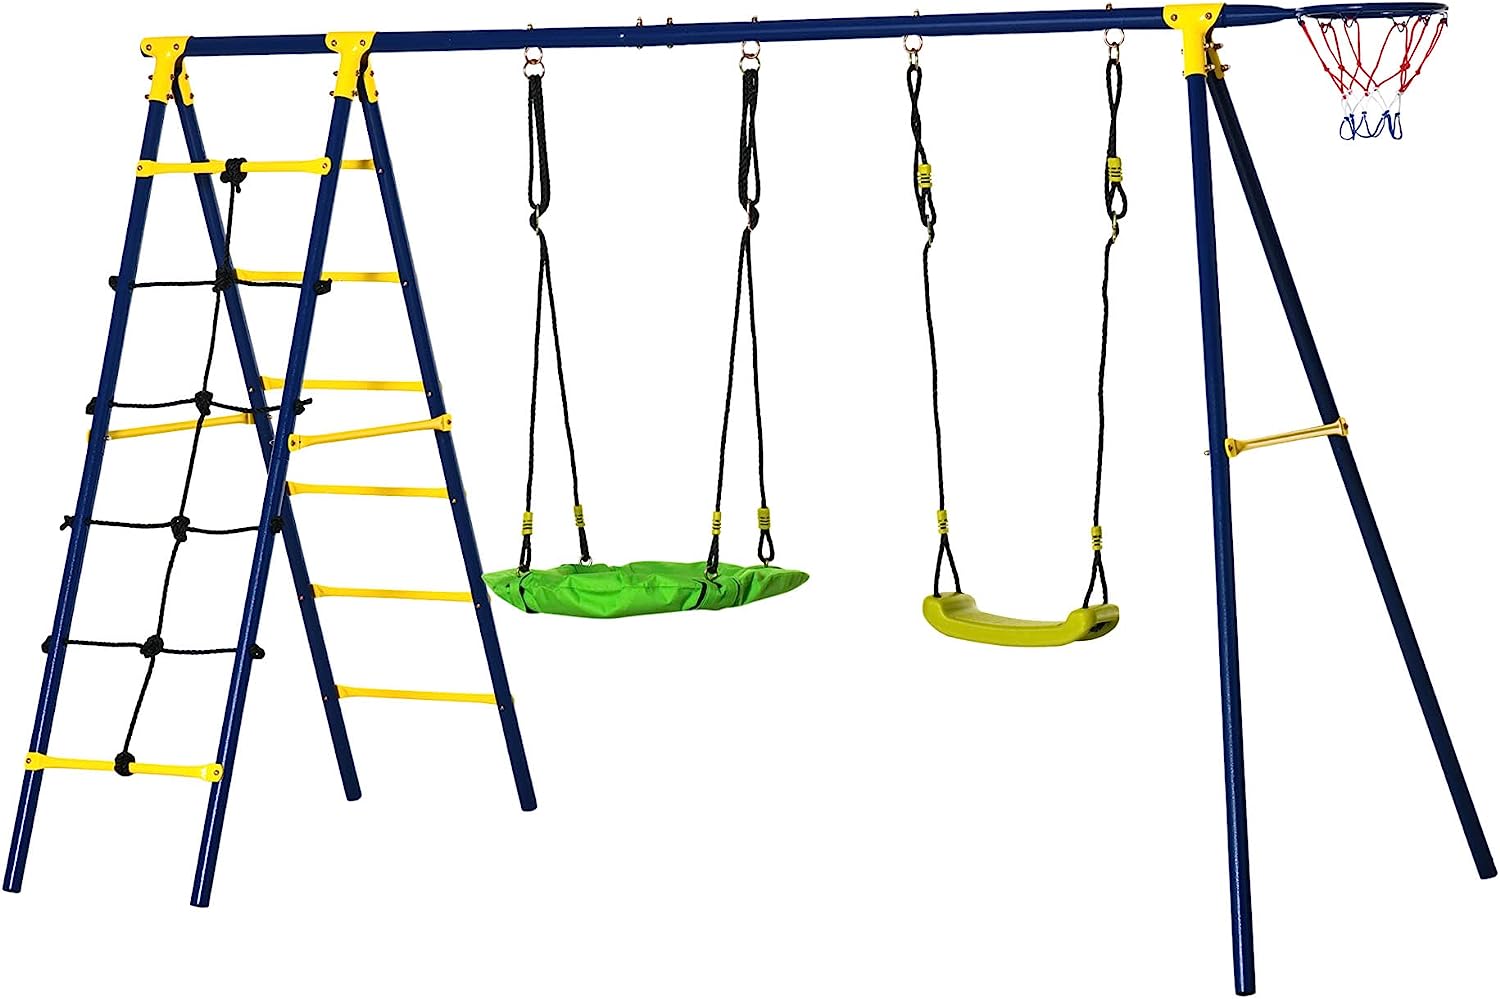 Outsunny Kids Metal Swing Set for Backyard, Outdoor [...]